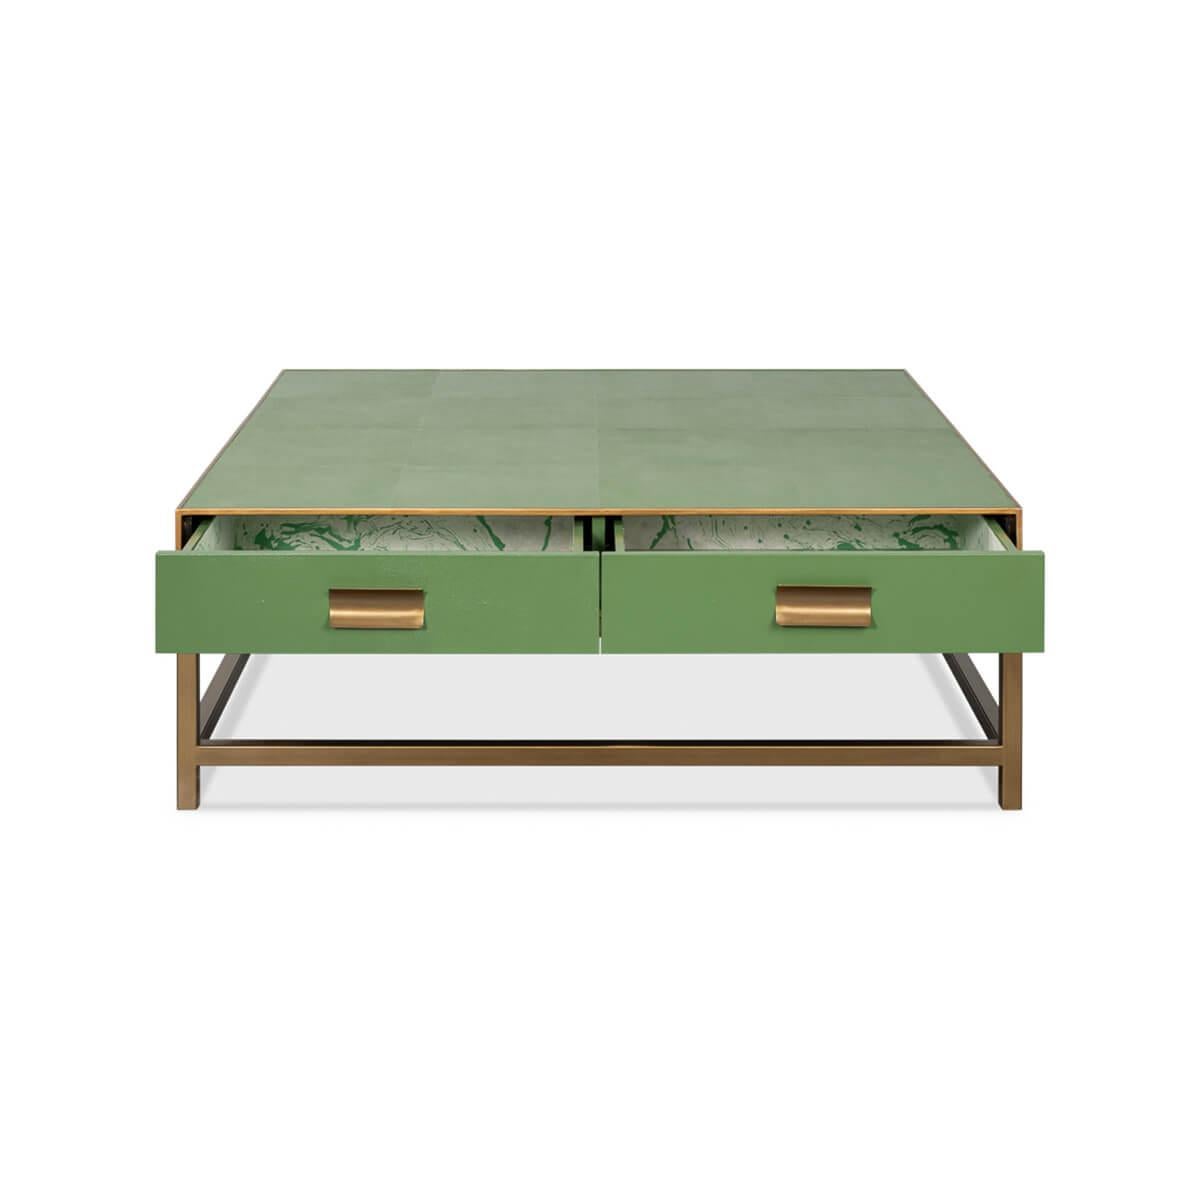 Asian Art Deco Leather Coffee Table in Watercress Green For Sale